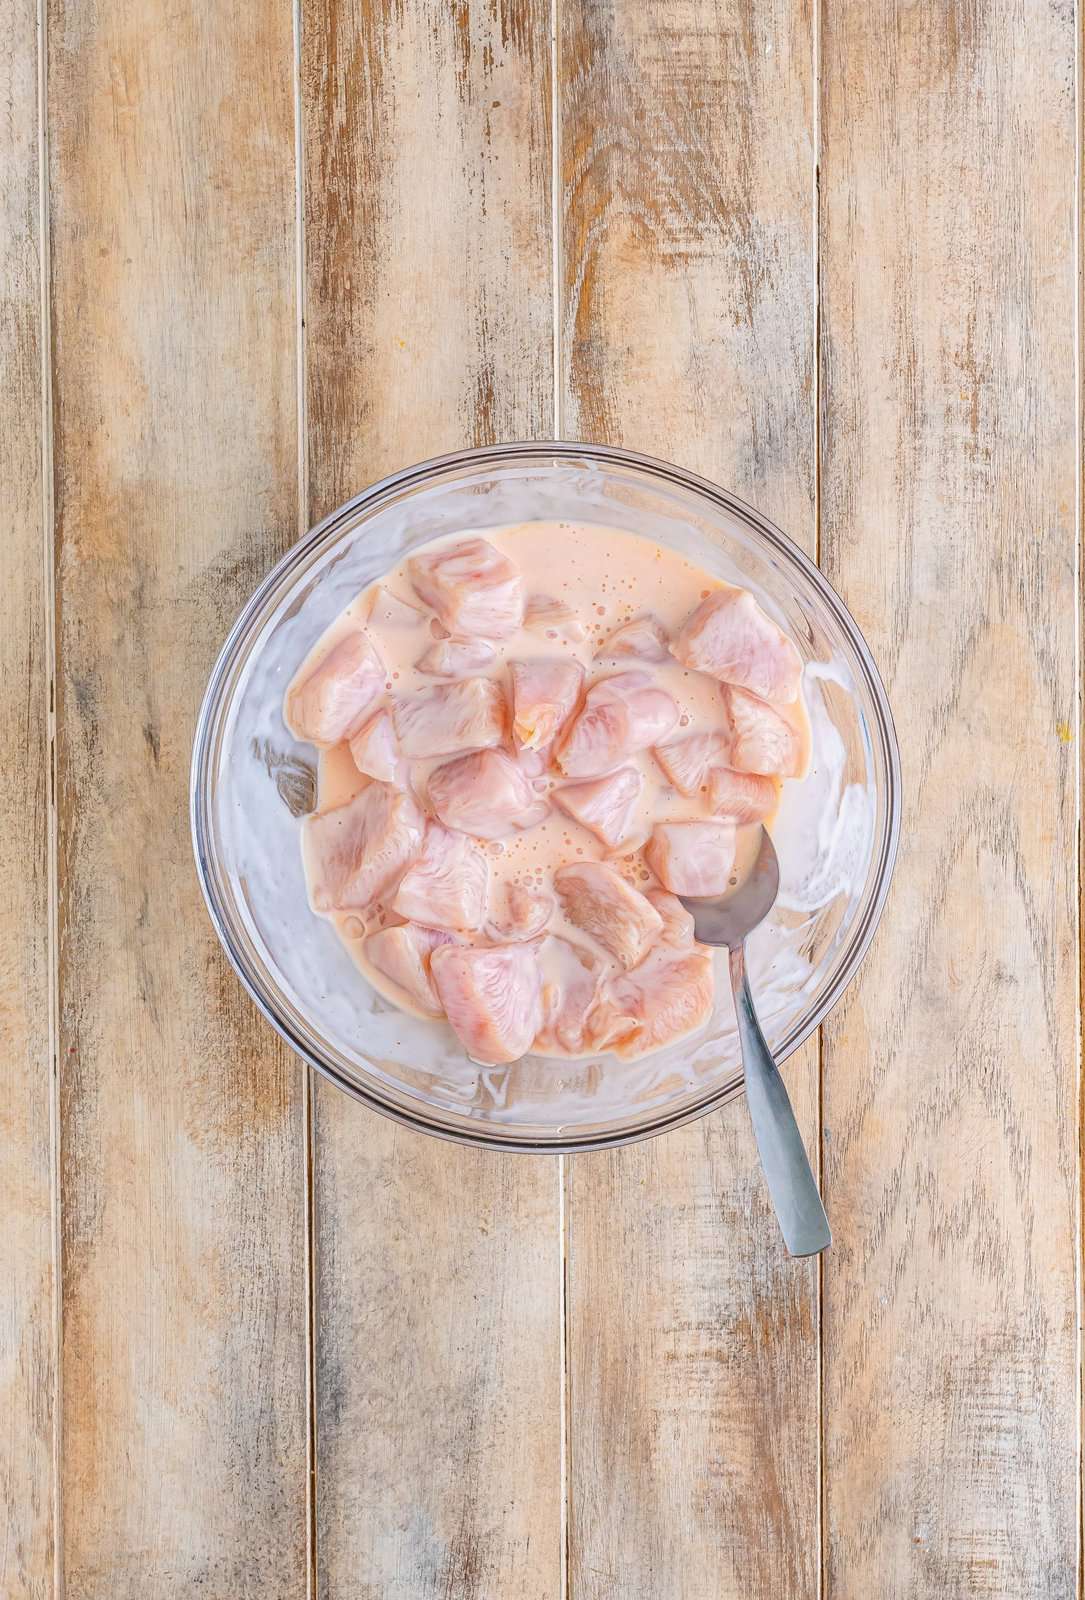 diced chicken meat showing in buttermilk brine in a clear bowl. 